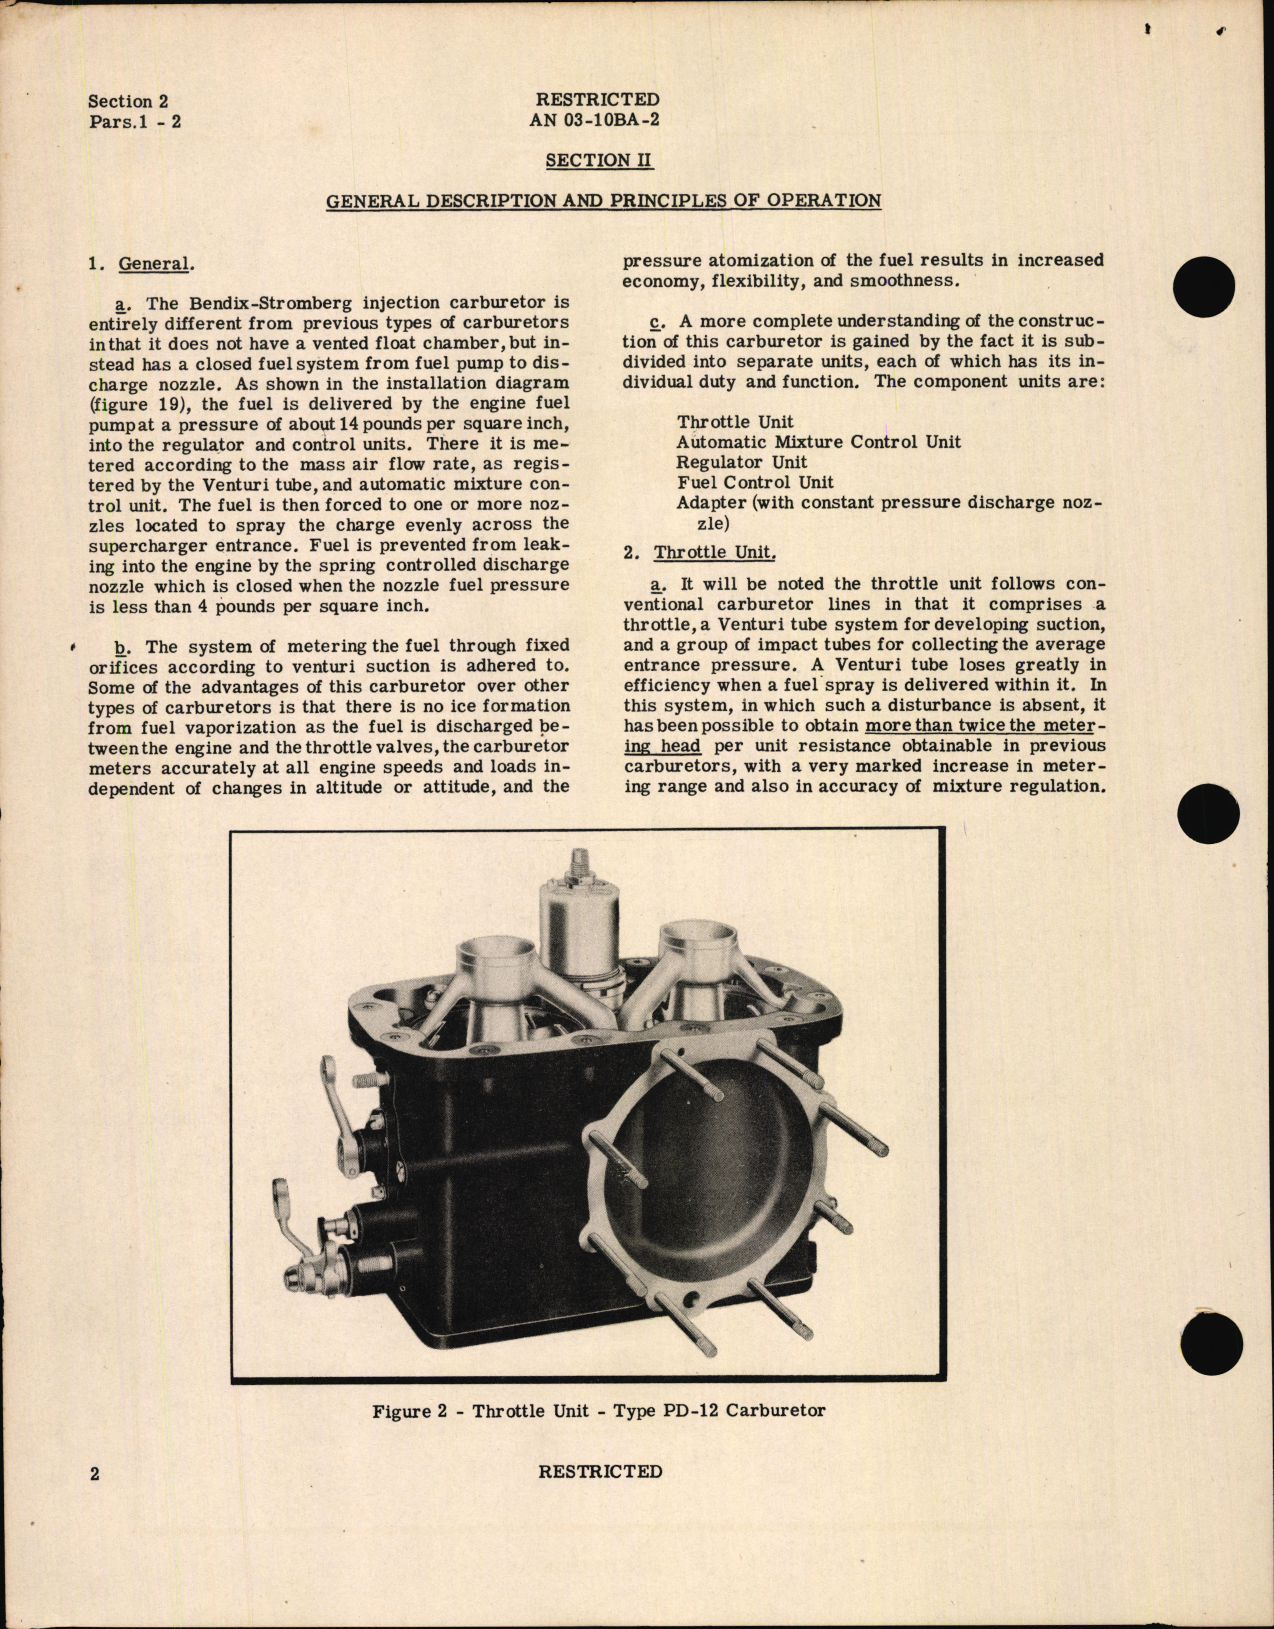 Sample page 8 from AirCorps Library document: Handbook of Service Instructions for Injection Carburetors